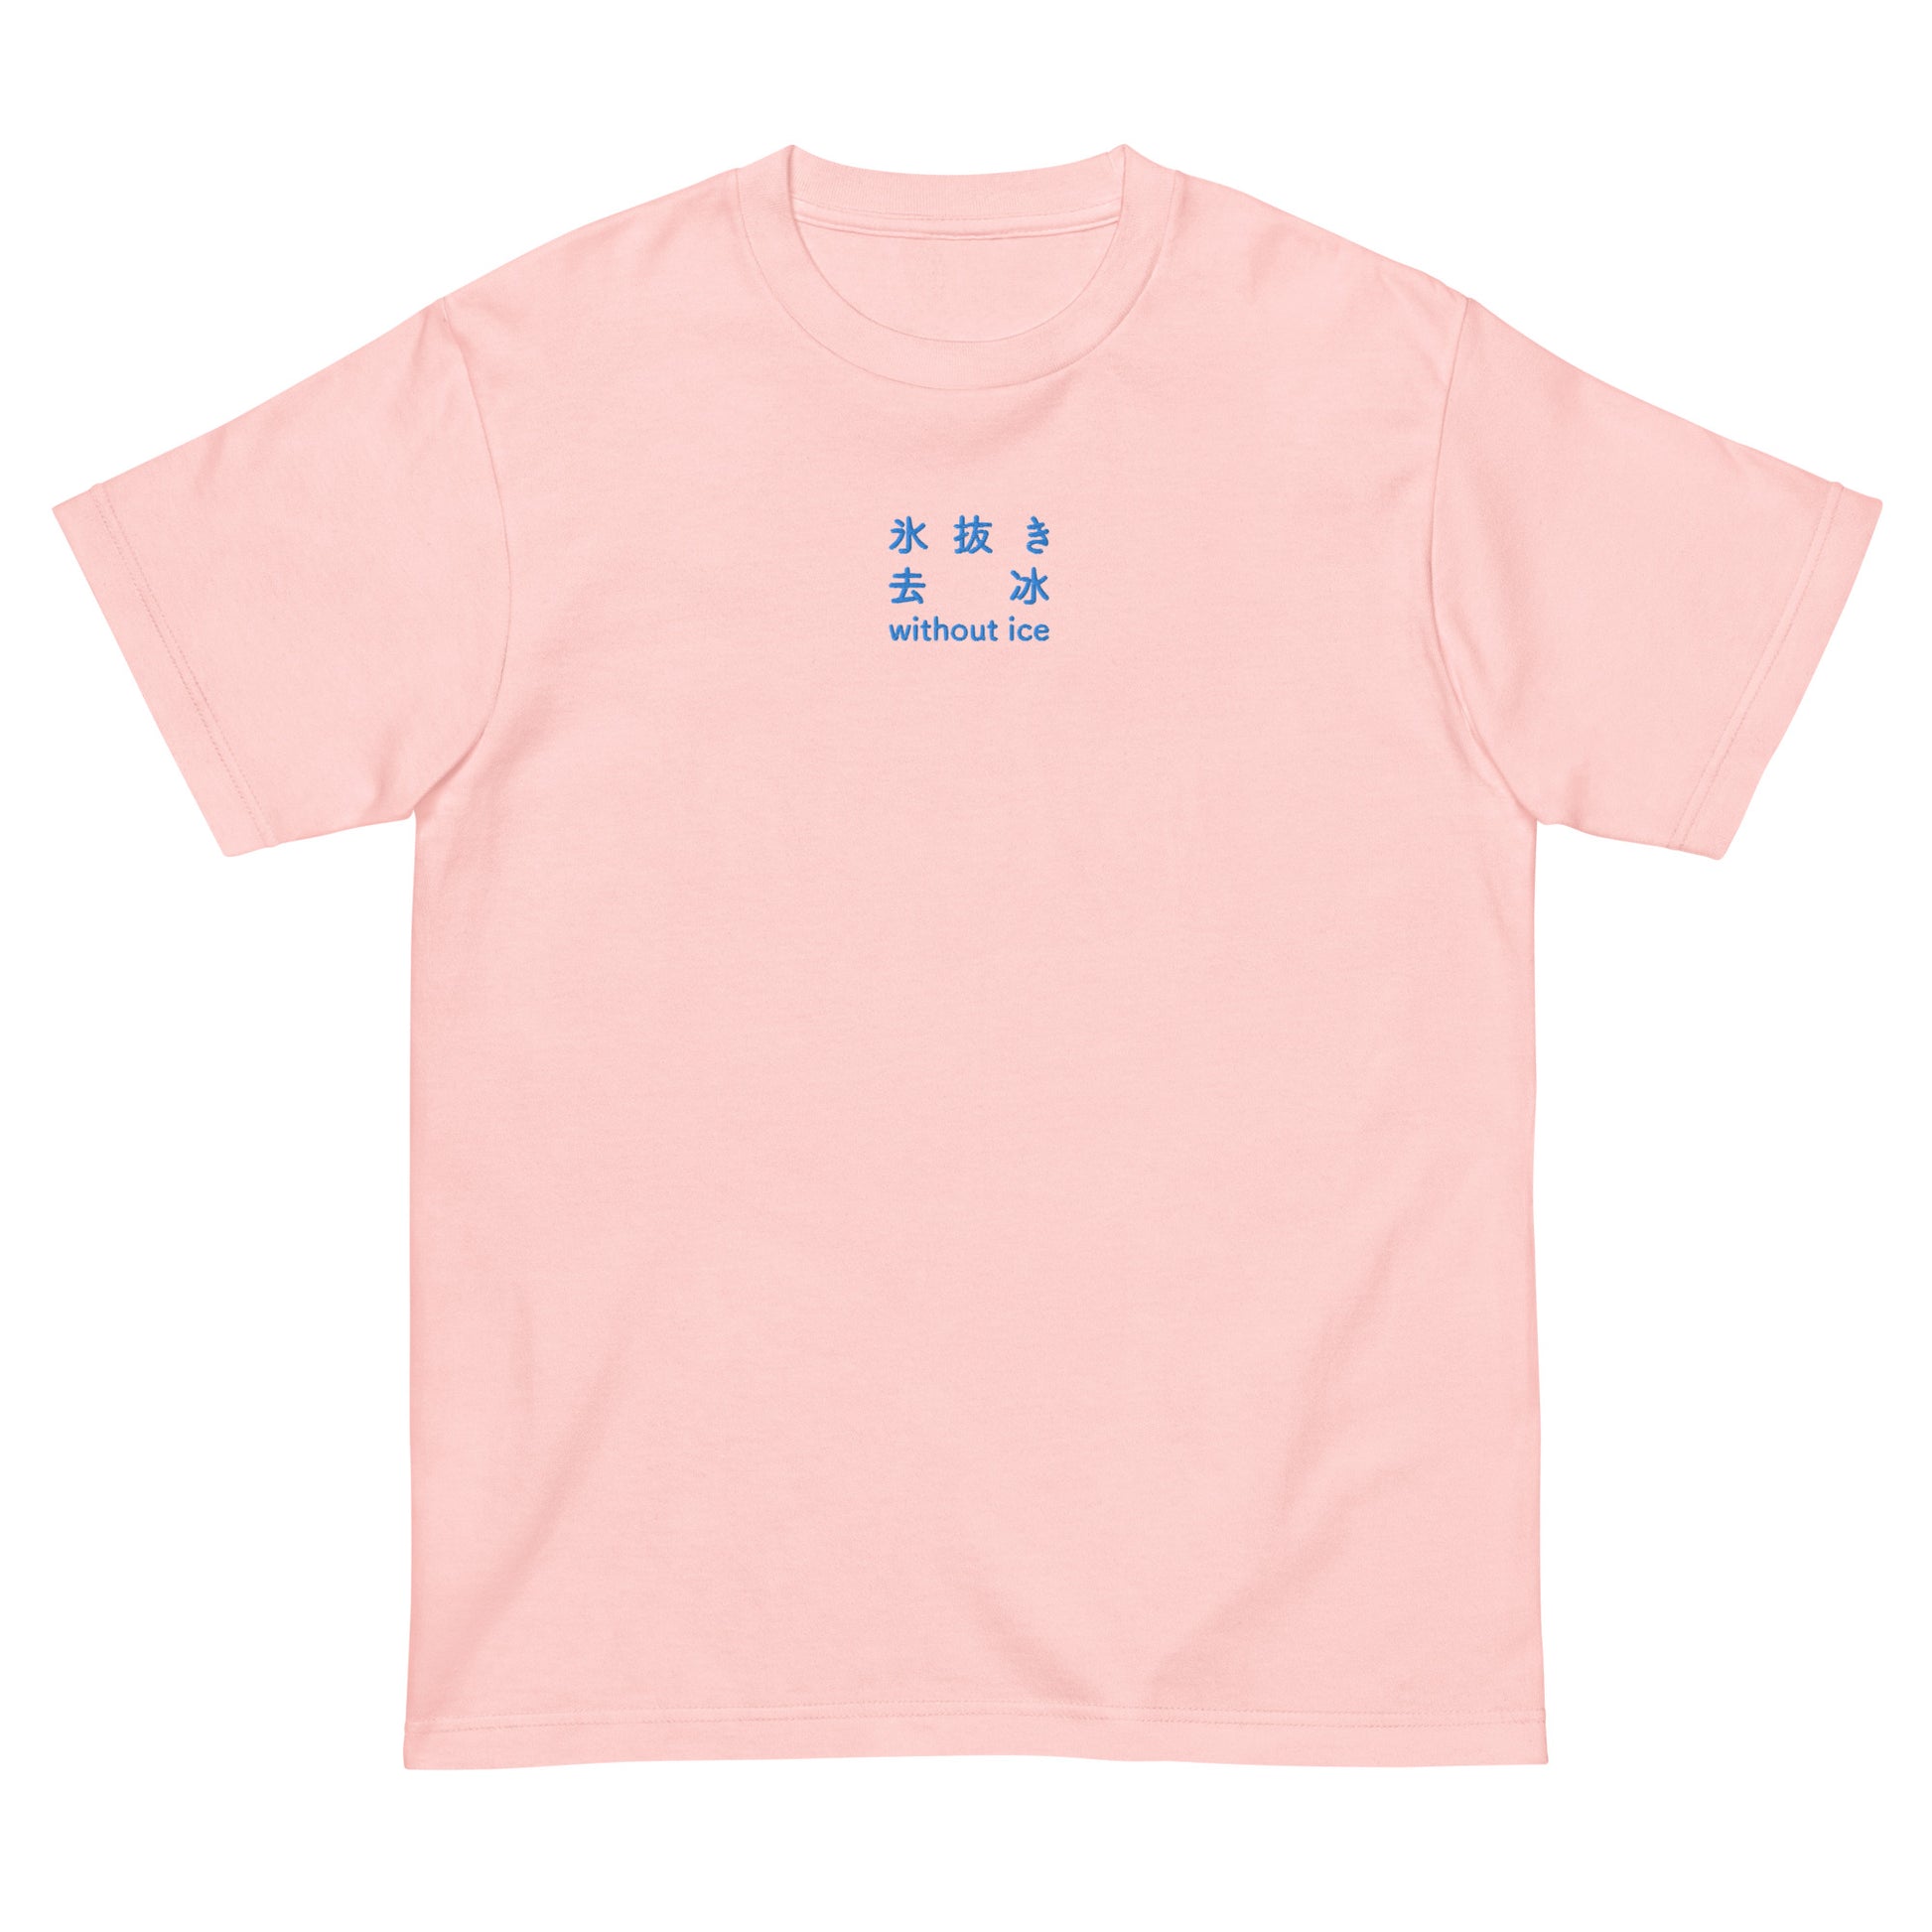 Pink High Quality Tee - Front Design with an Blue Embroidery "Without Ice" in Japanese,Chinese and English